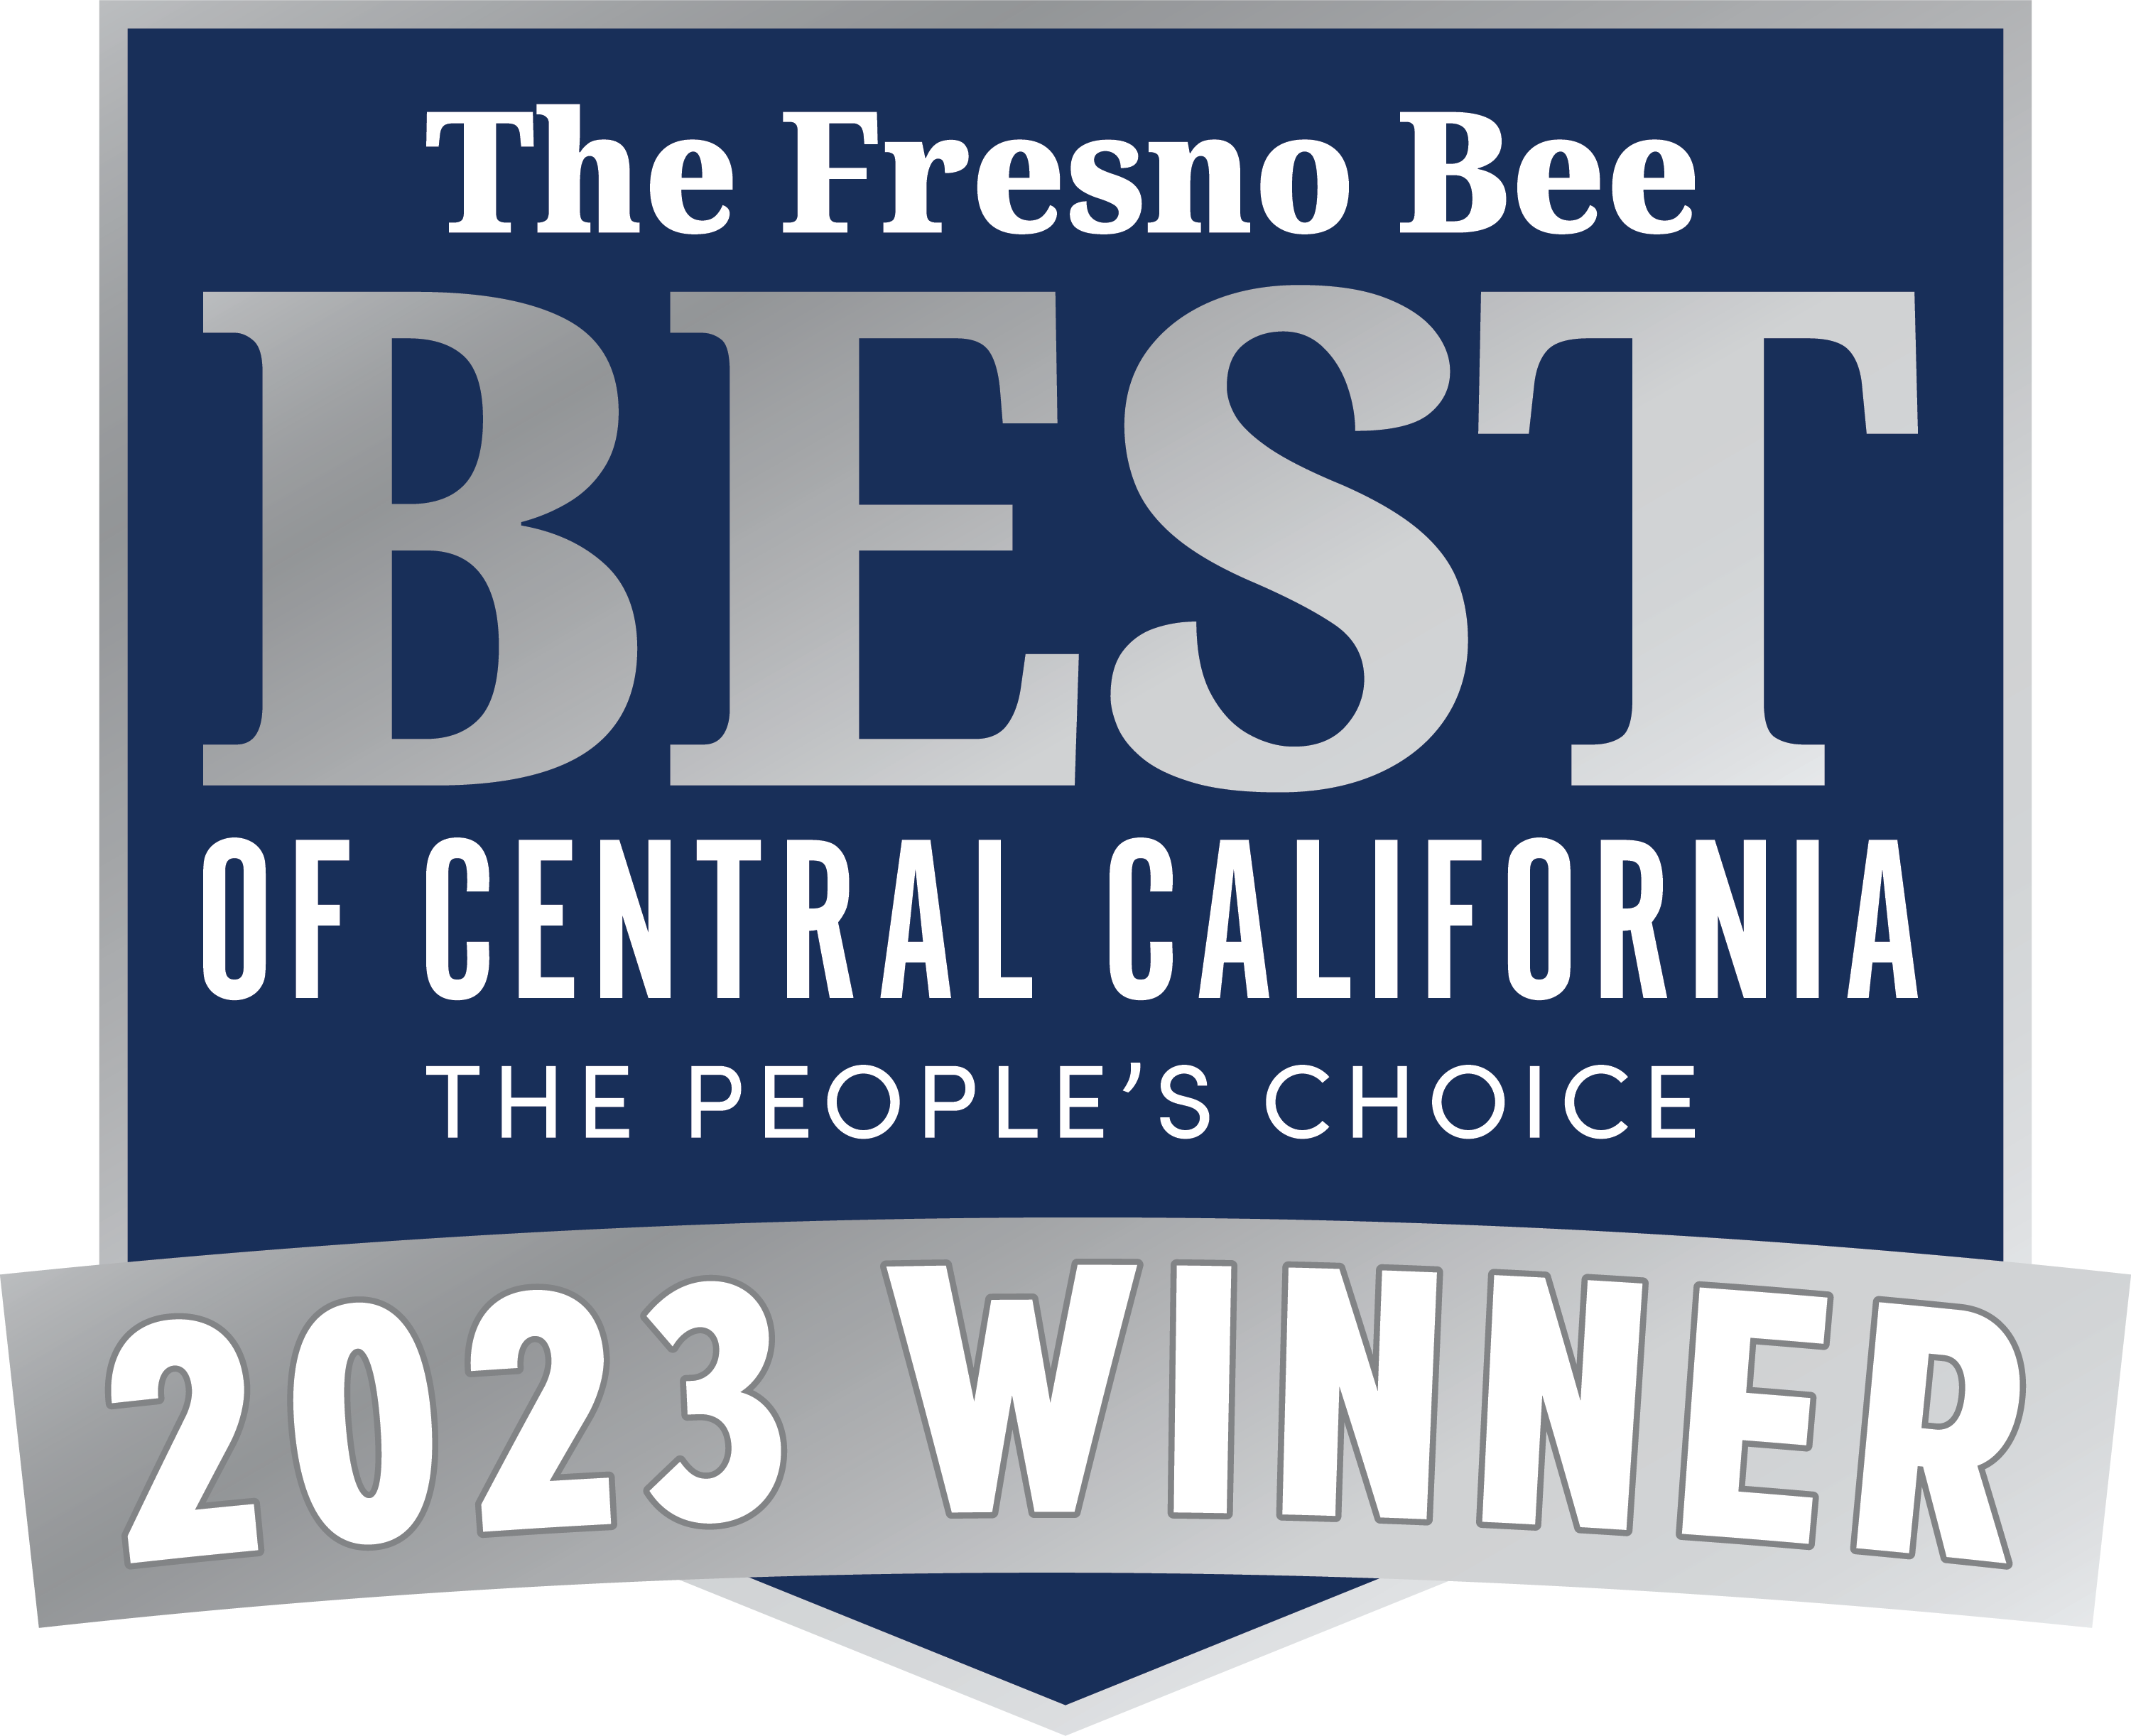 The Fresno Bee Best of Central California The People's Choice 2023 Winner